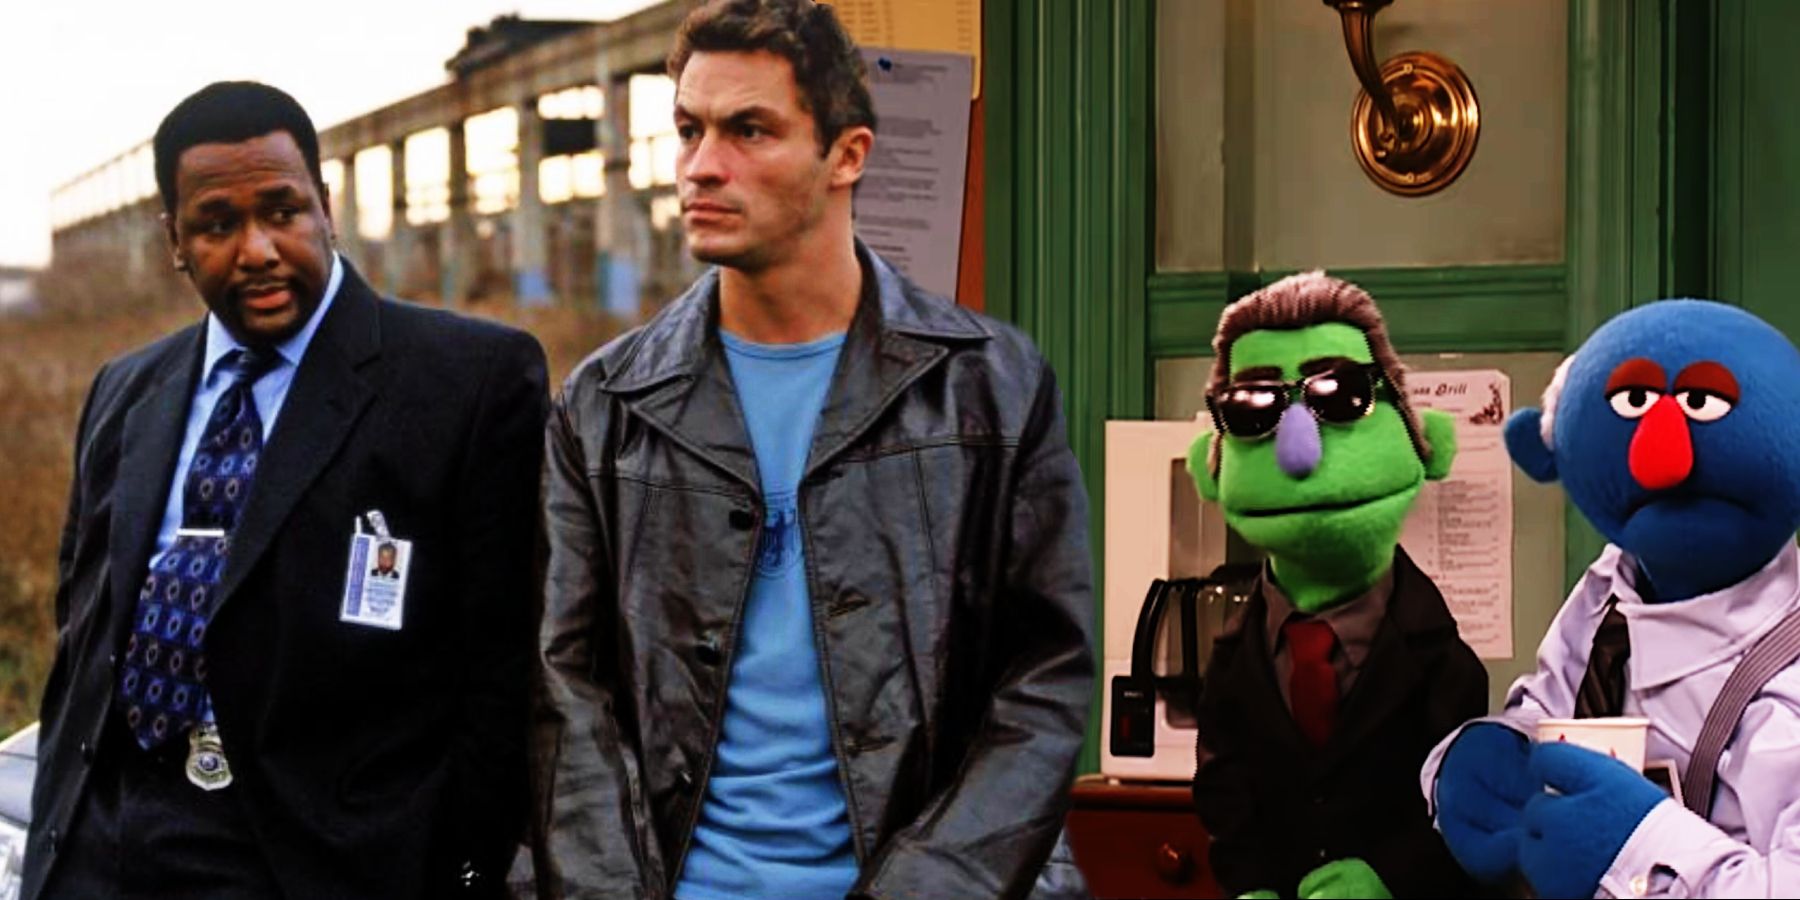 Bunk and McNulty in The Wire and John Munch in Sesame Street